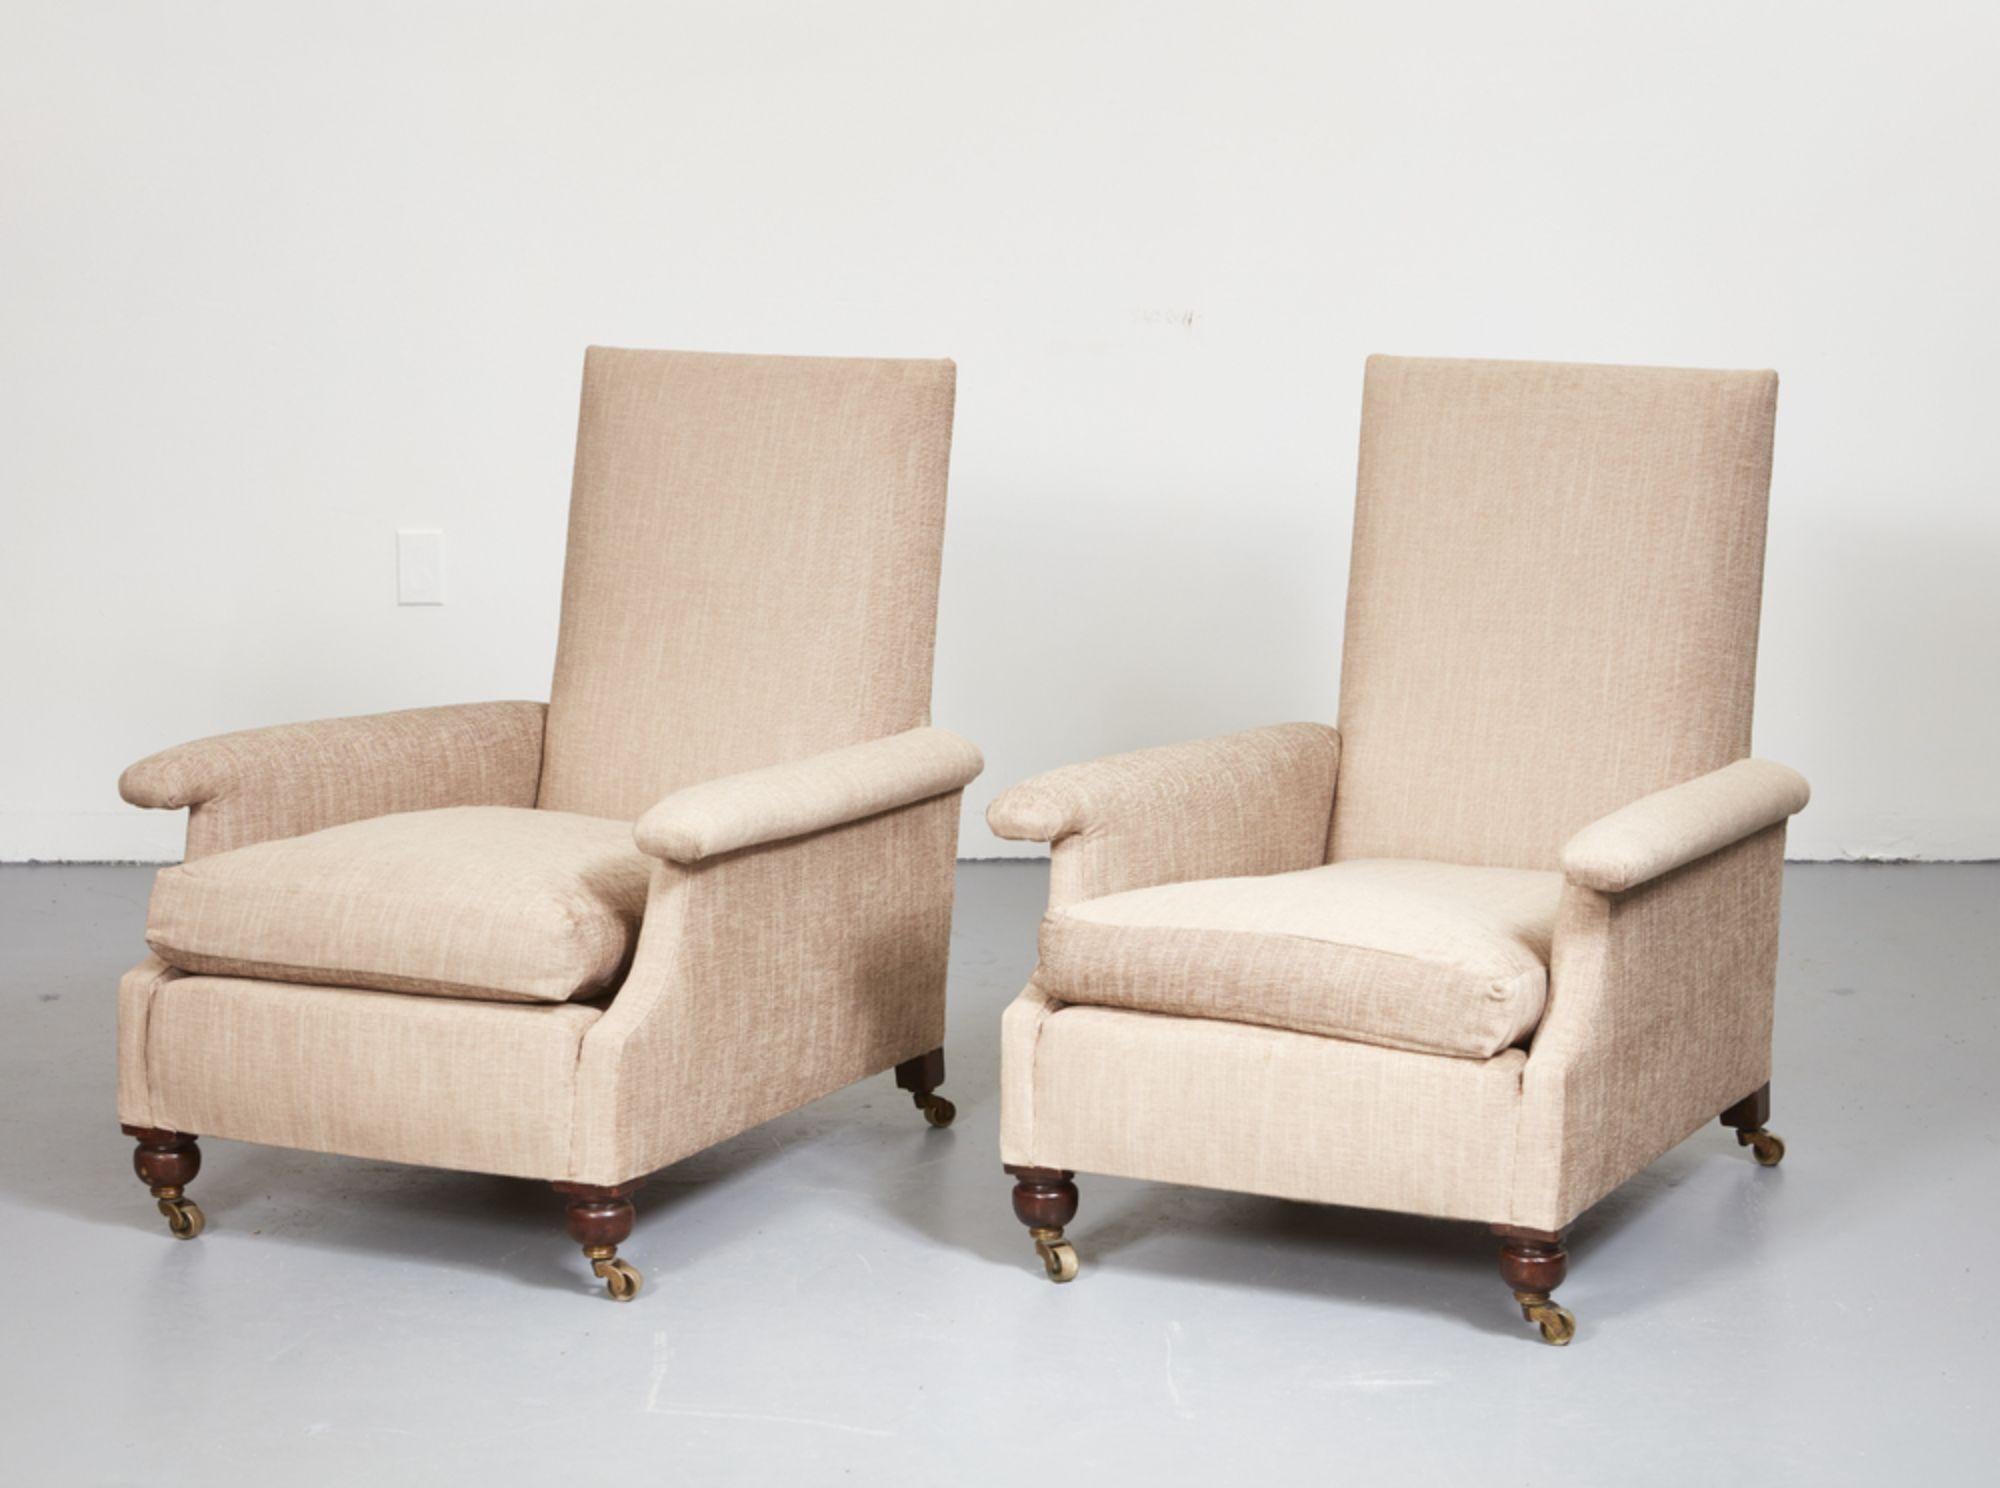 A 19th century pair of generously proportioned English club chairs newly upholstered in hand-woven cream colored Scottish tweed, with down filled seat cushions and extra down filled back custom designed back cushions, padded and railed arms and deep